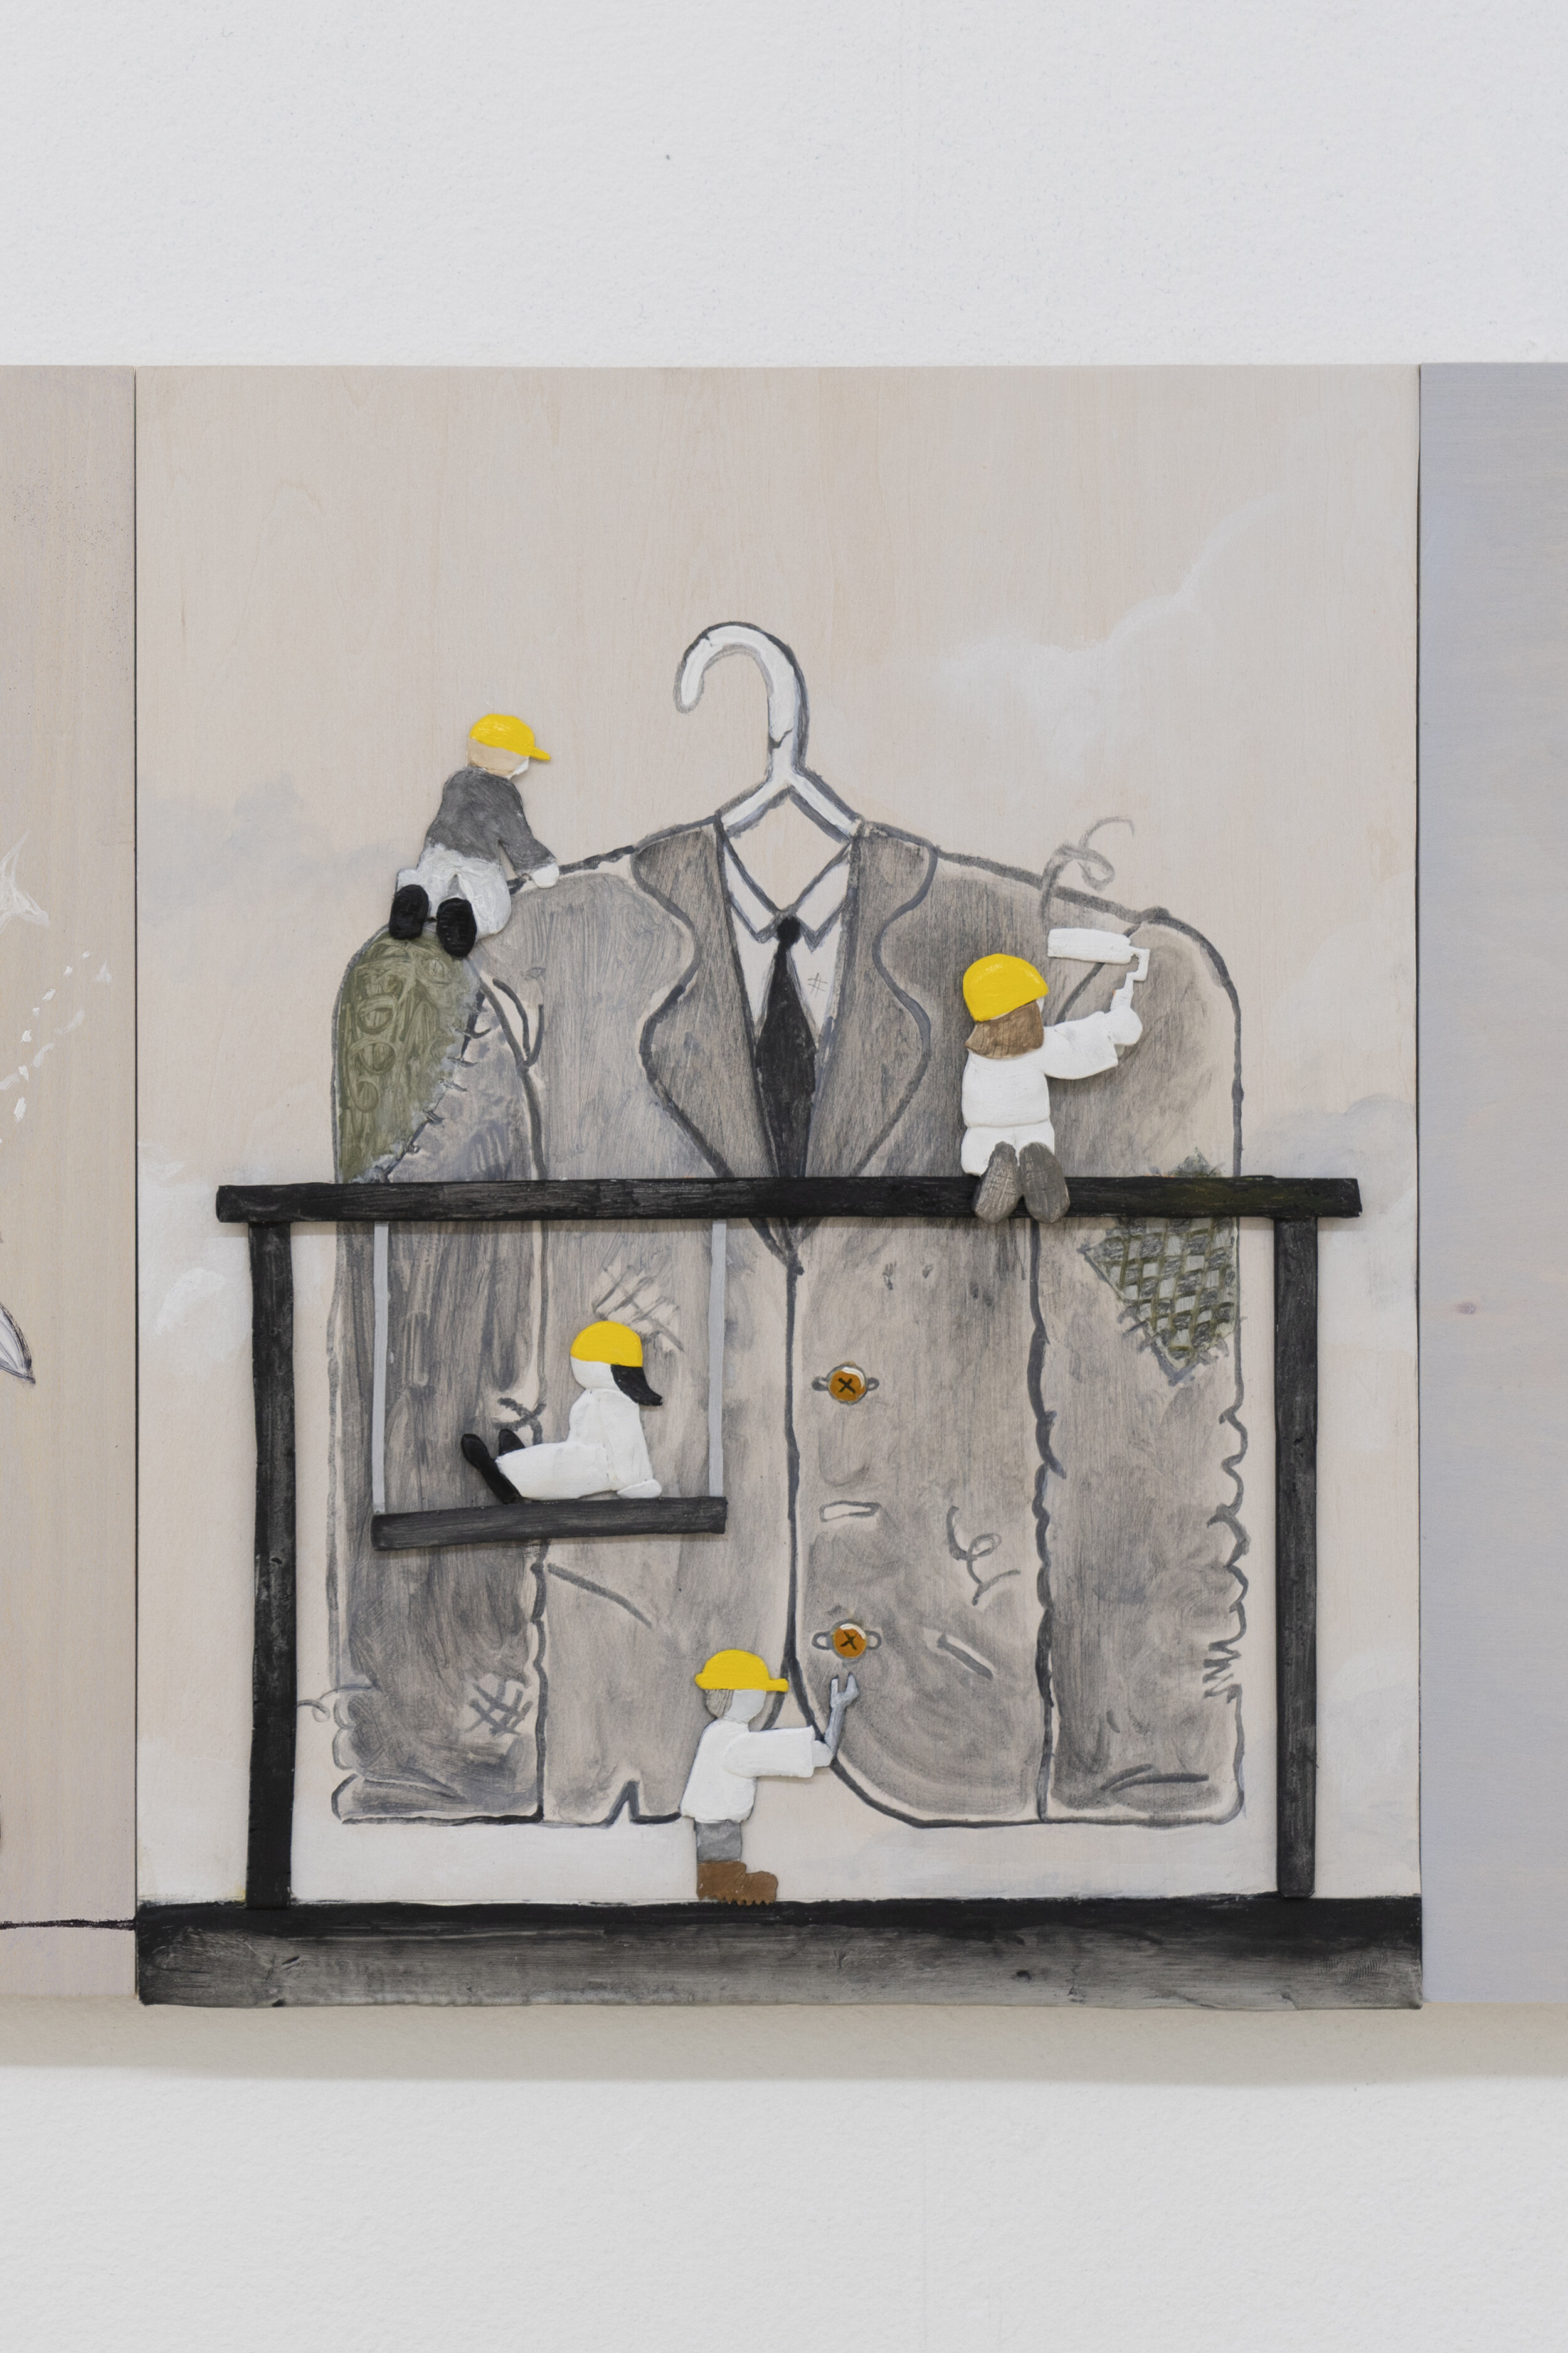  Dennis Witkin  Repairing Jacket,  2020 Oil paint, acrylic paint, cal-tint, wood-stain, charcoal, graphite, epoxy clay, polymer clay on panel 14 x 11 inches 